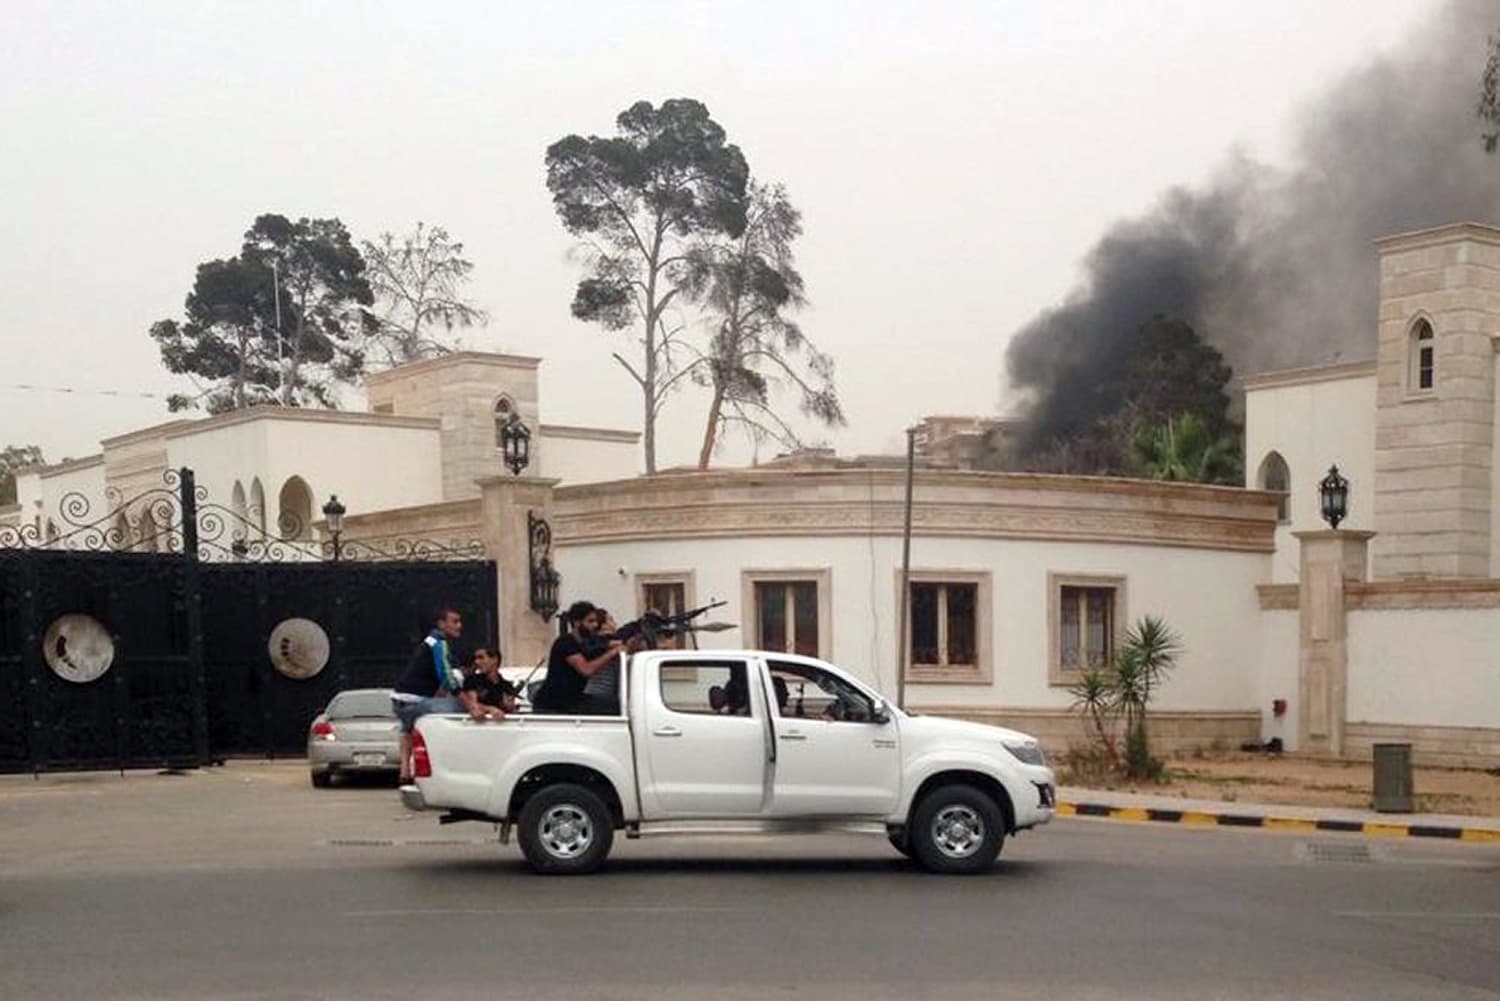 Image: Armed men aim their weapons from a vehicle as smoke rises in the background near the General National Congress in Tripoli